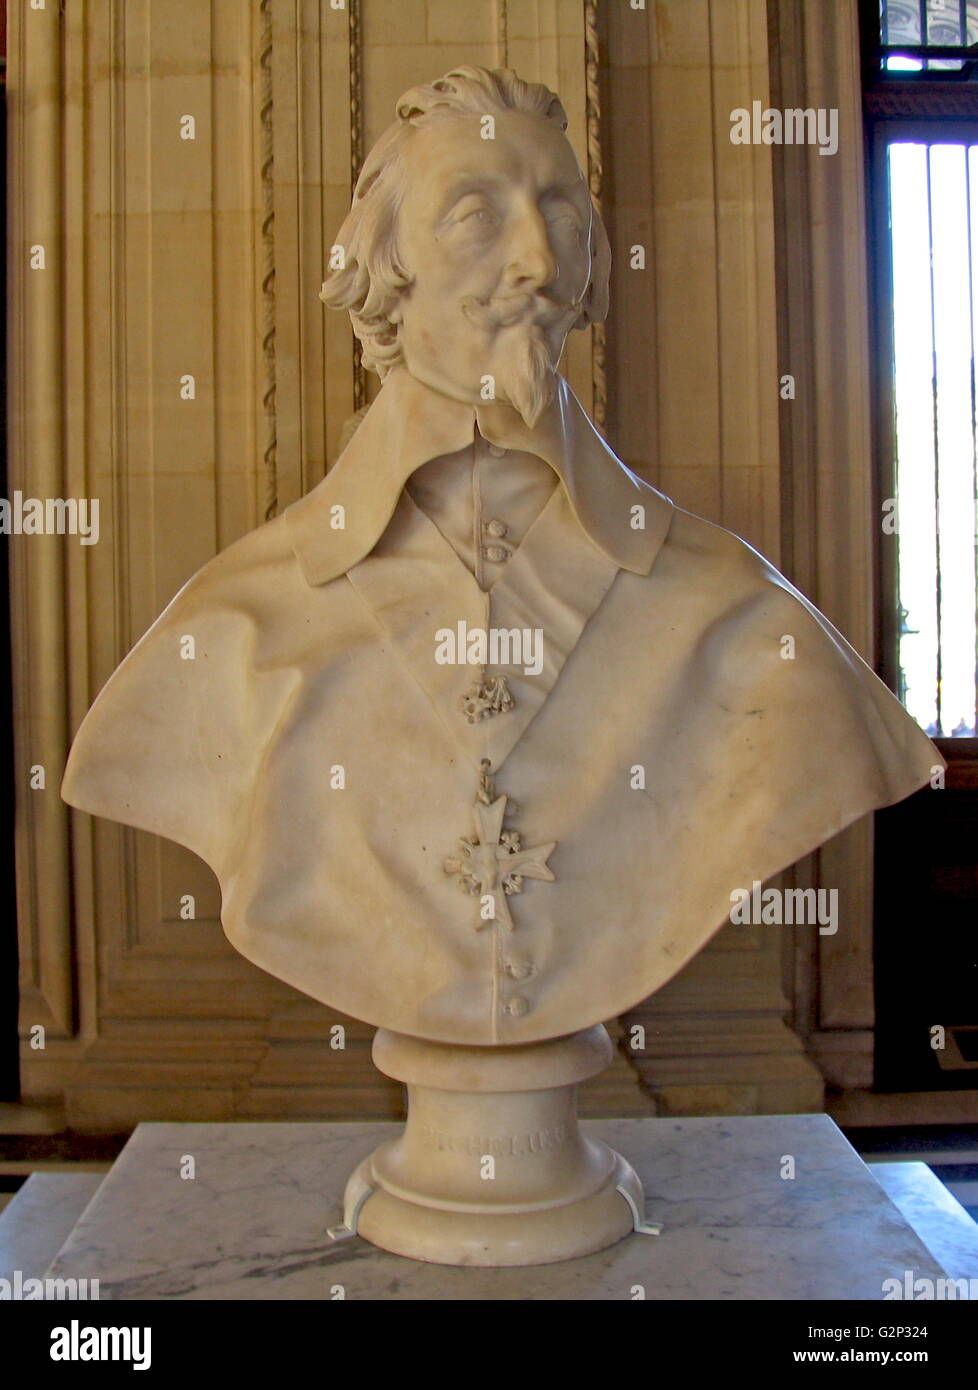 Cardinal Richelieu Sculpture by Gian Lorenzo Bernini. Circa 1641 AD. Made from Marble. In the baroque style. Stock Photo